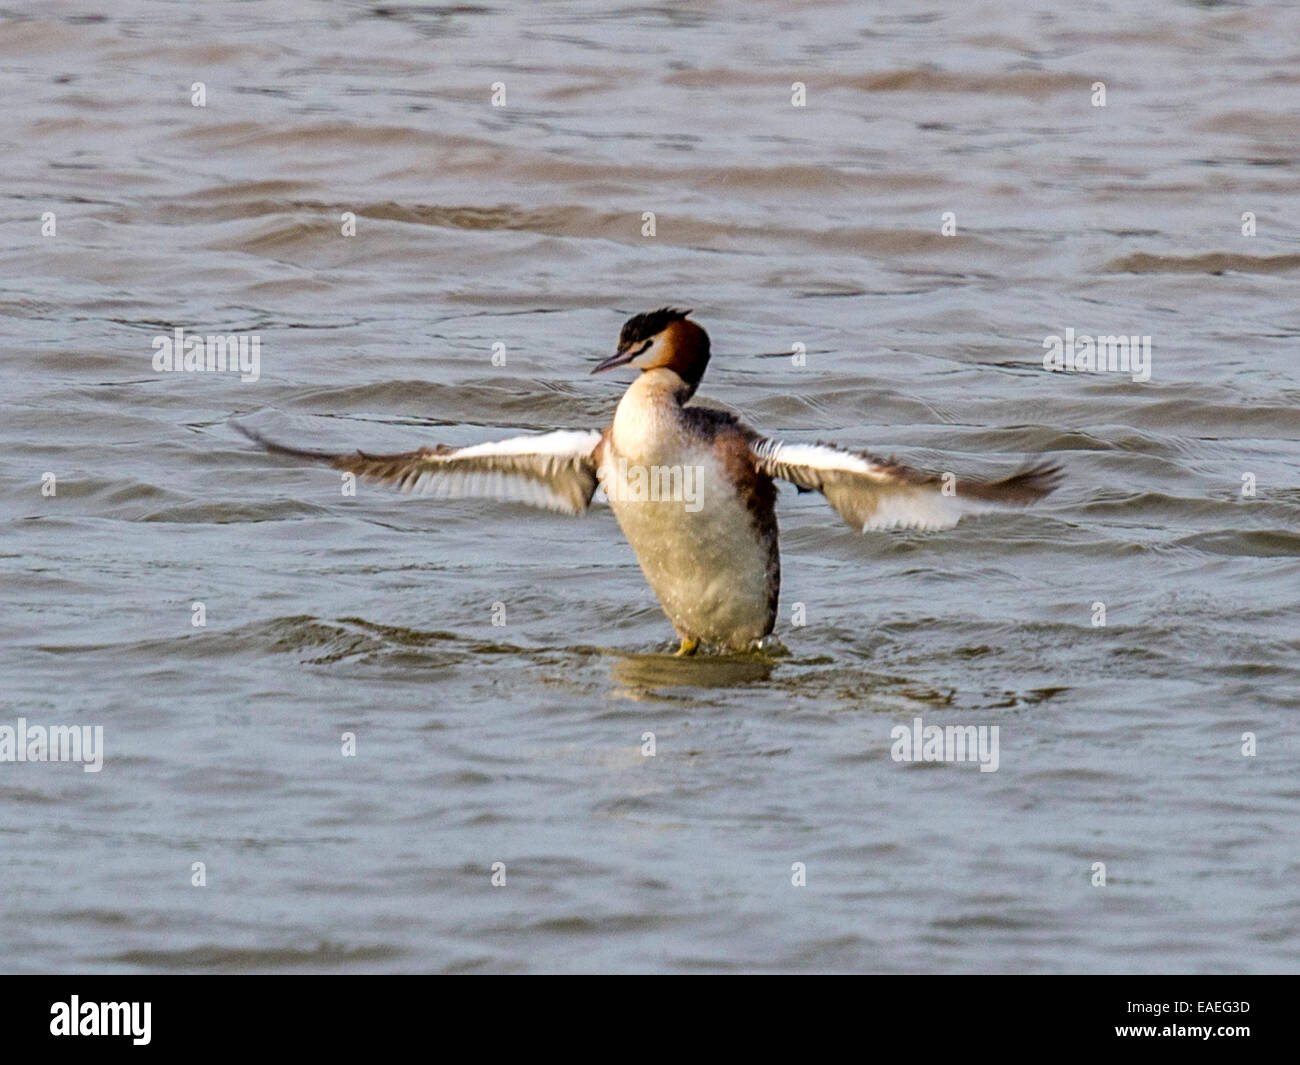 A Grebe [Podicipedidae] flexes its wings, lifting itself out of the cold sea water. Stock Photo